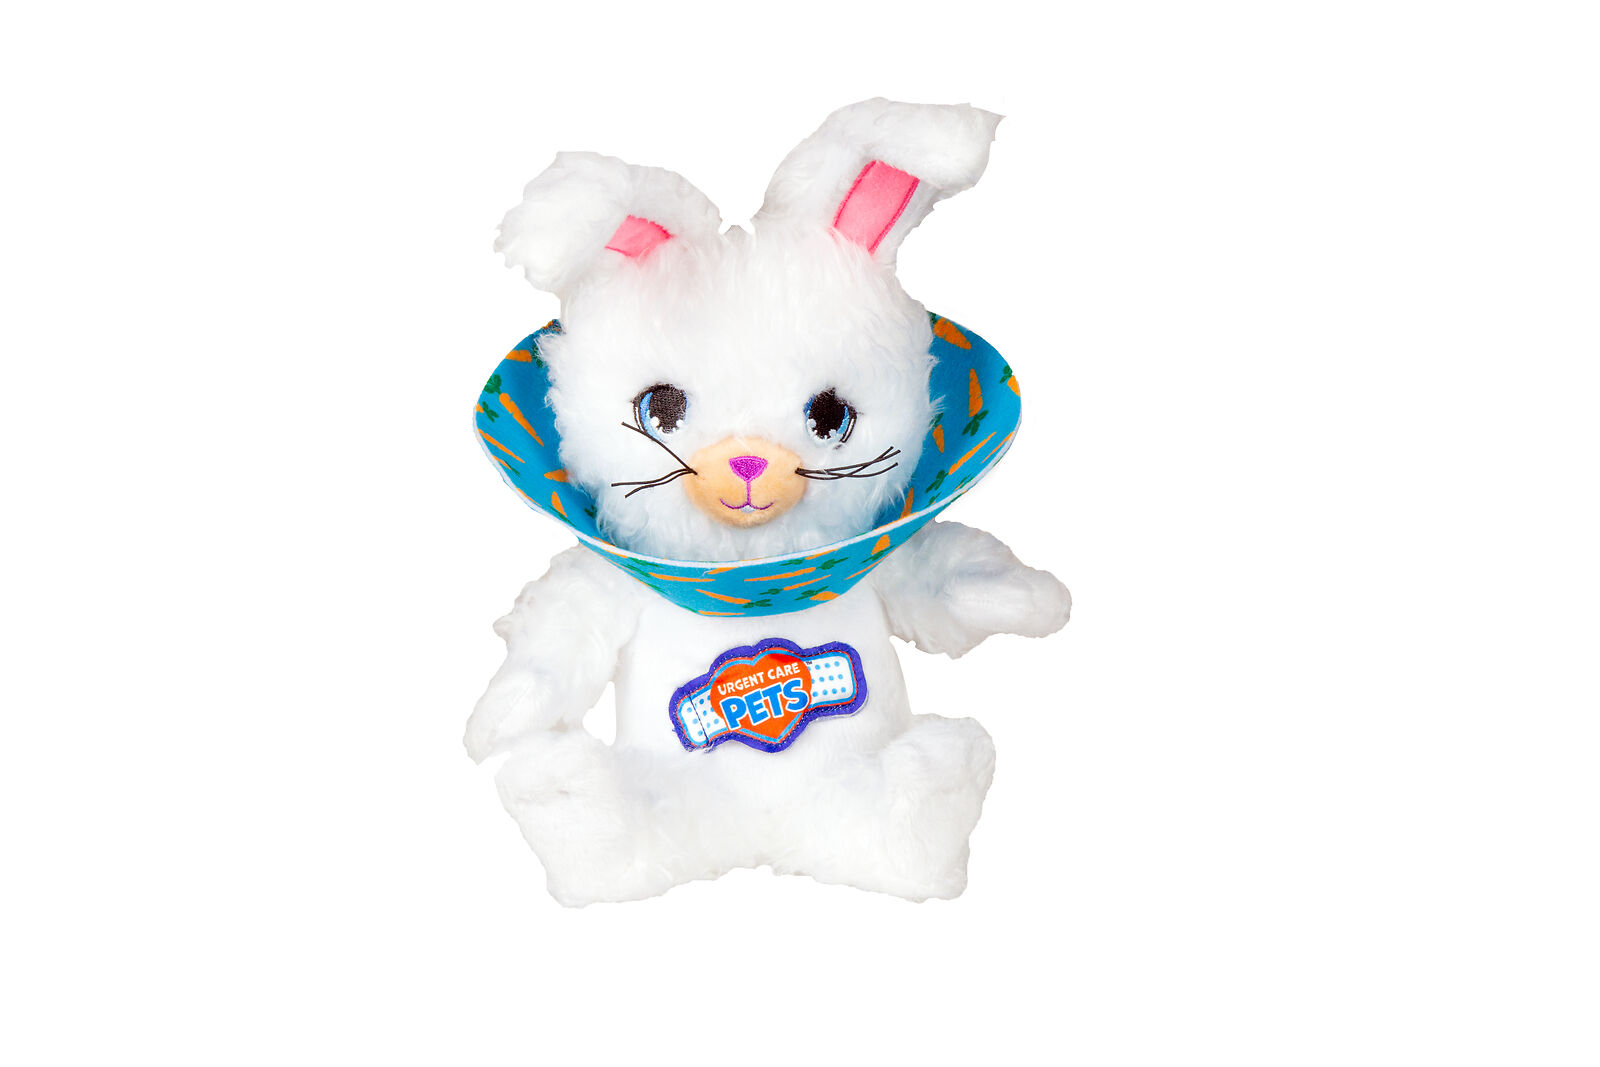 Urgent Care Pets - Talking Interactive Toy Pet White Rabbit with Blue Cone - Inc